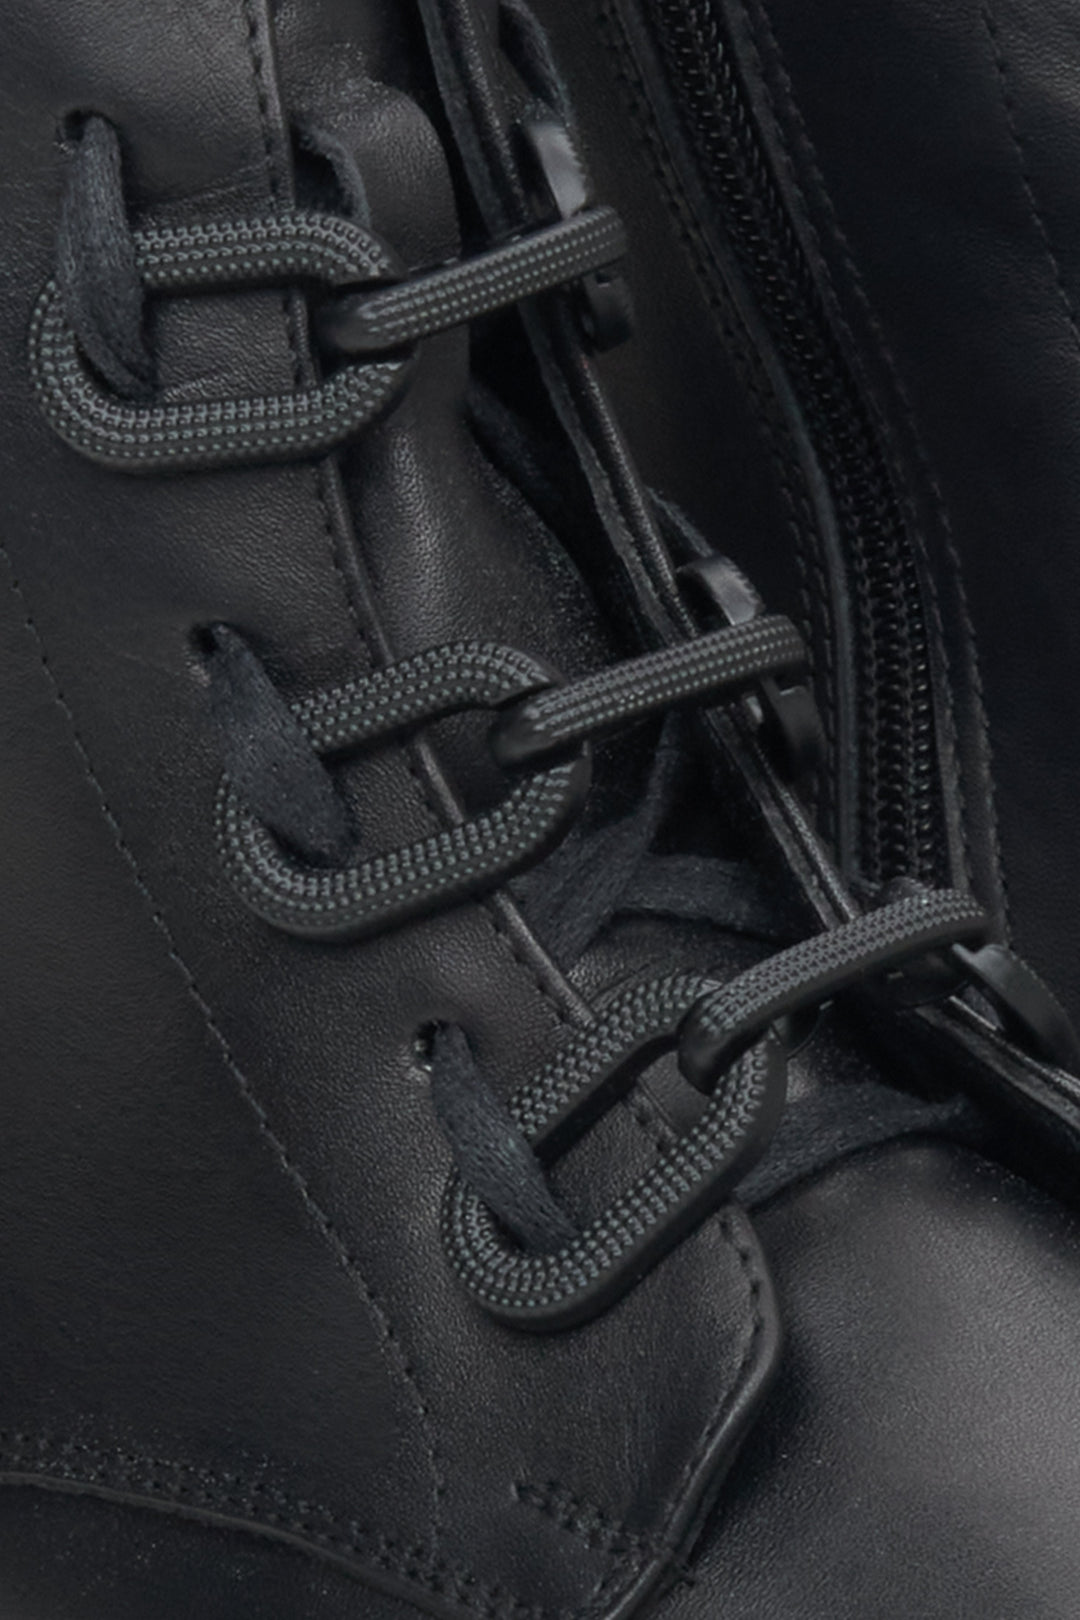 Women's black leather insulated ankle boots - a close-upon details.